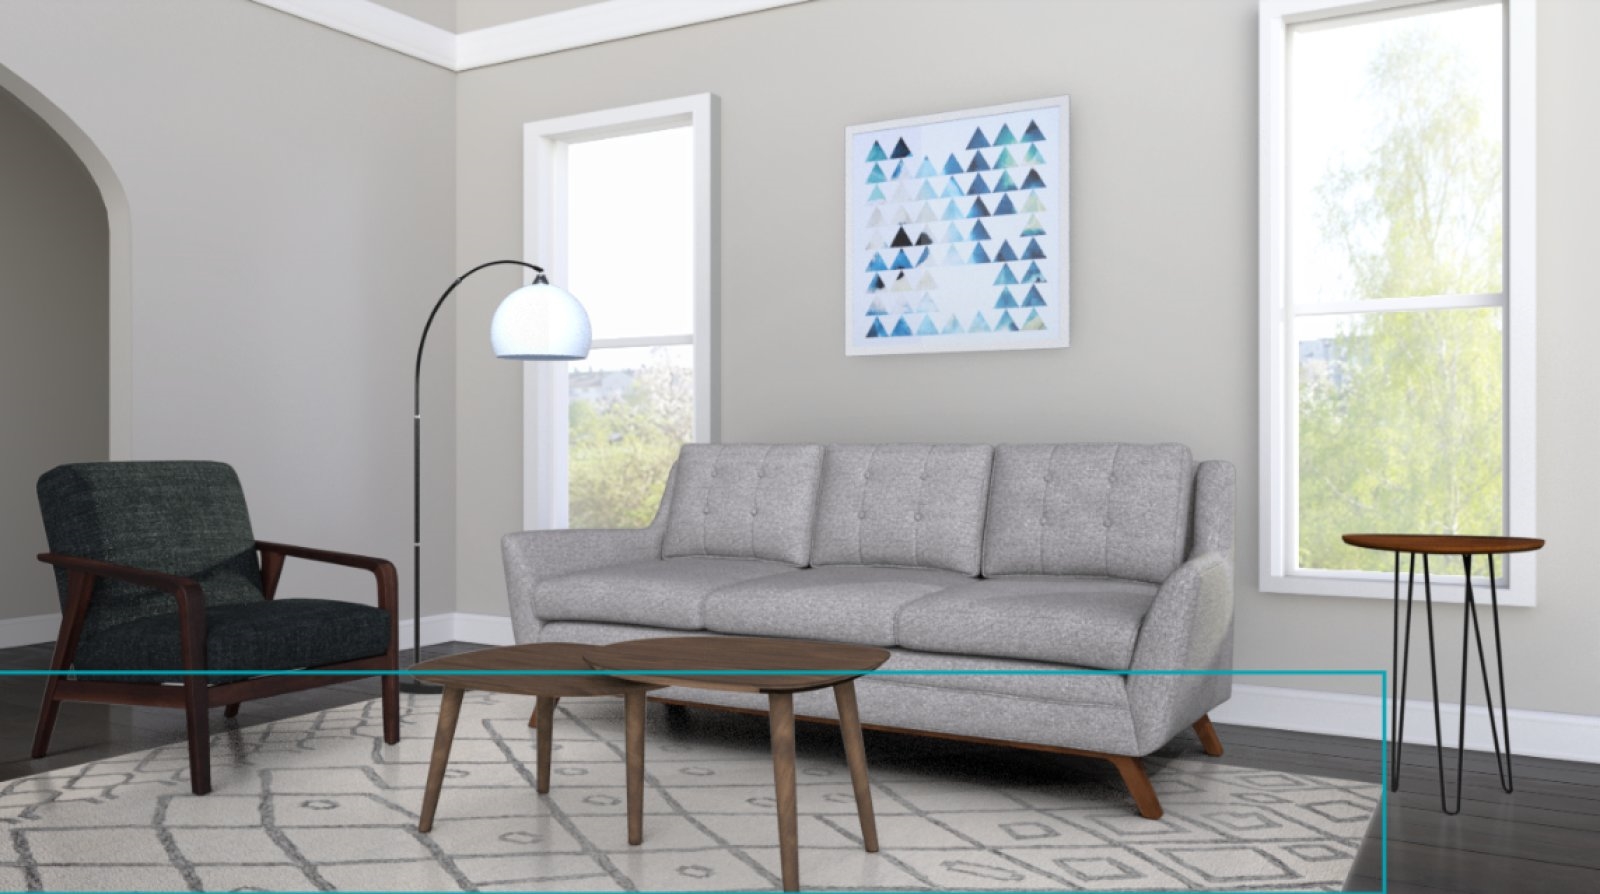 Amazon's online Showroom shows you if different furniture goes together | DeviceDaily.com